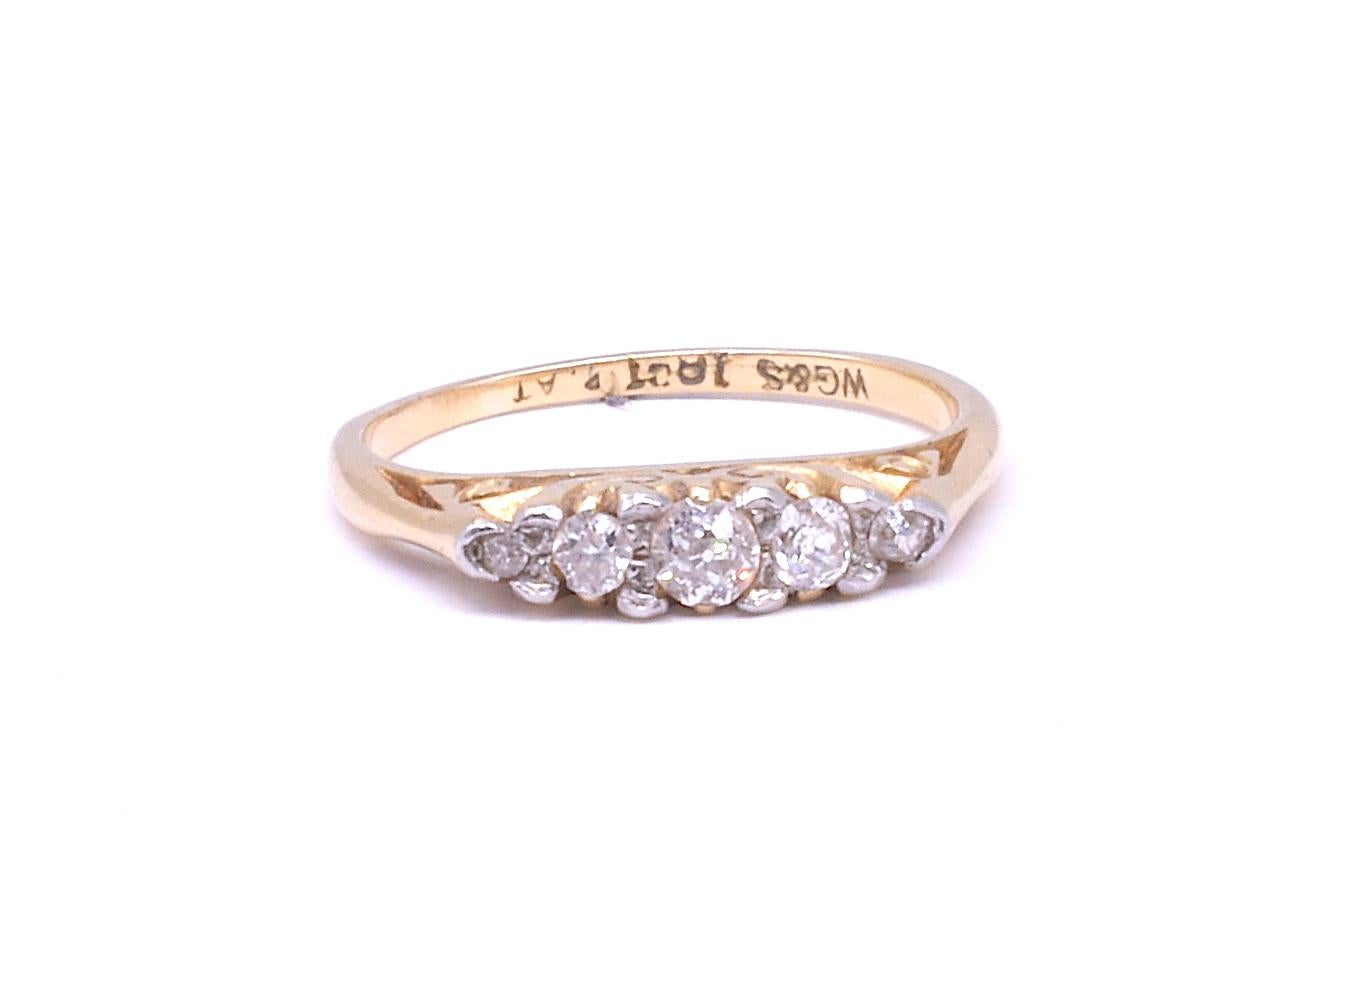 Ring of diamonds and platinum, our band has 5 cushion cut diamond atop a band incised with scrolls and 